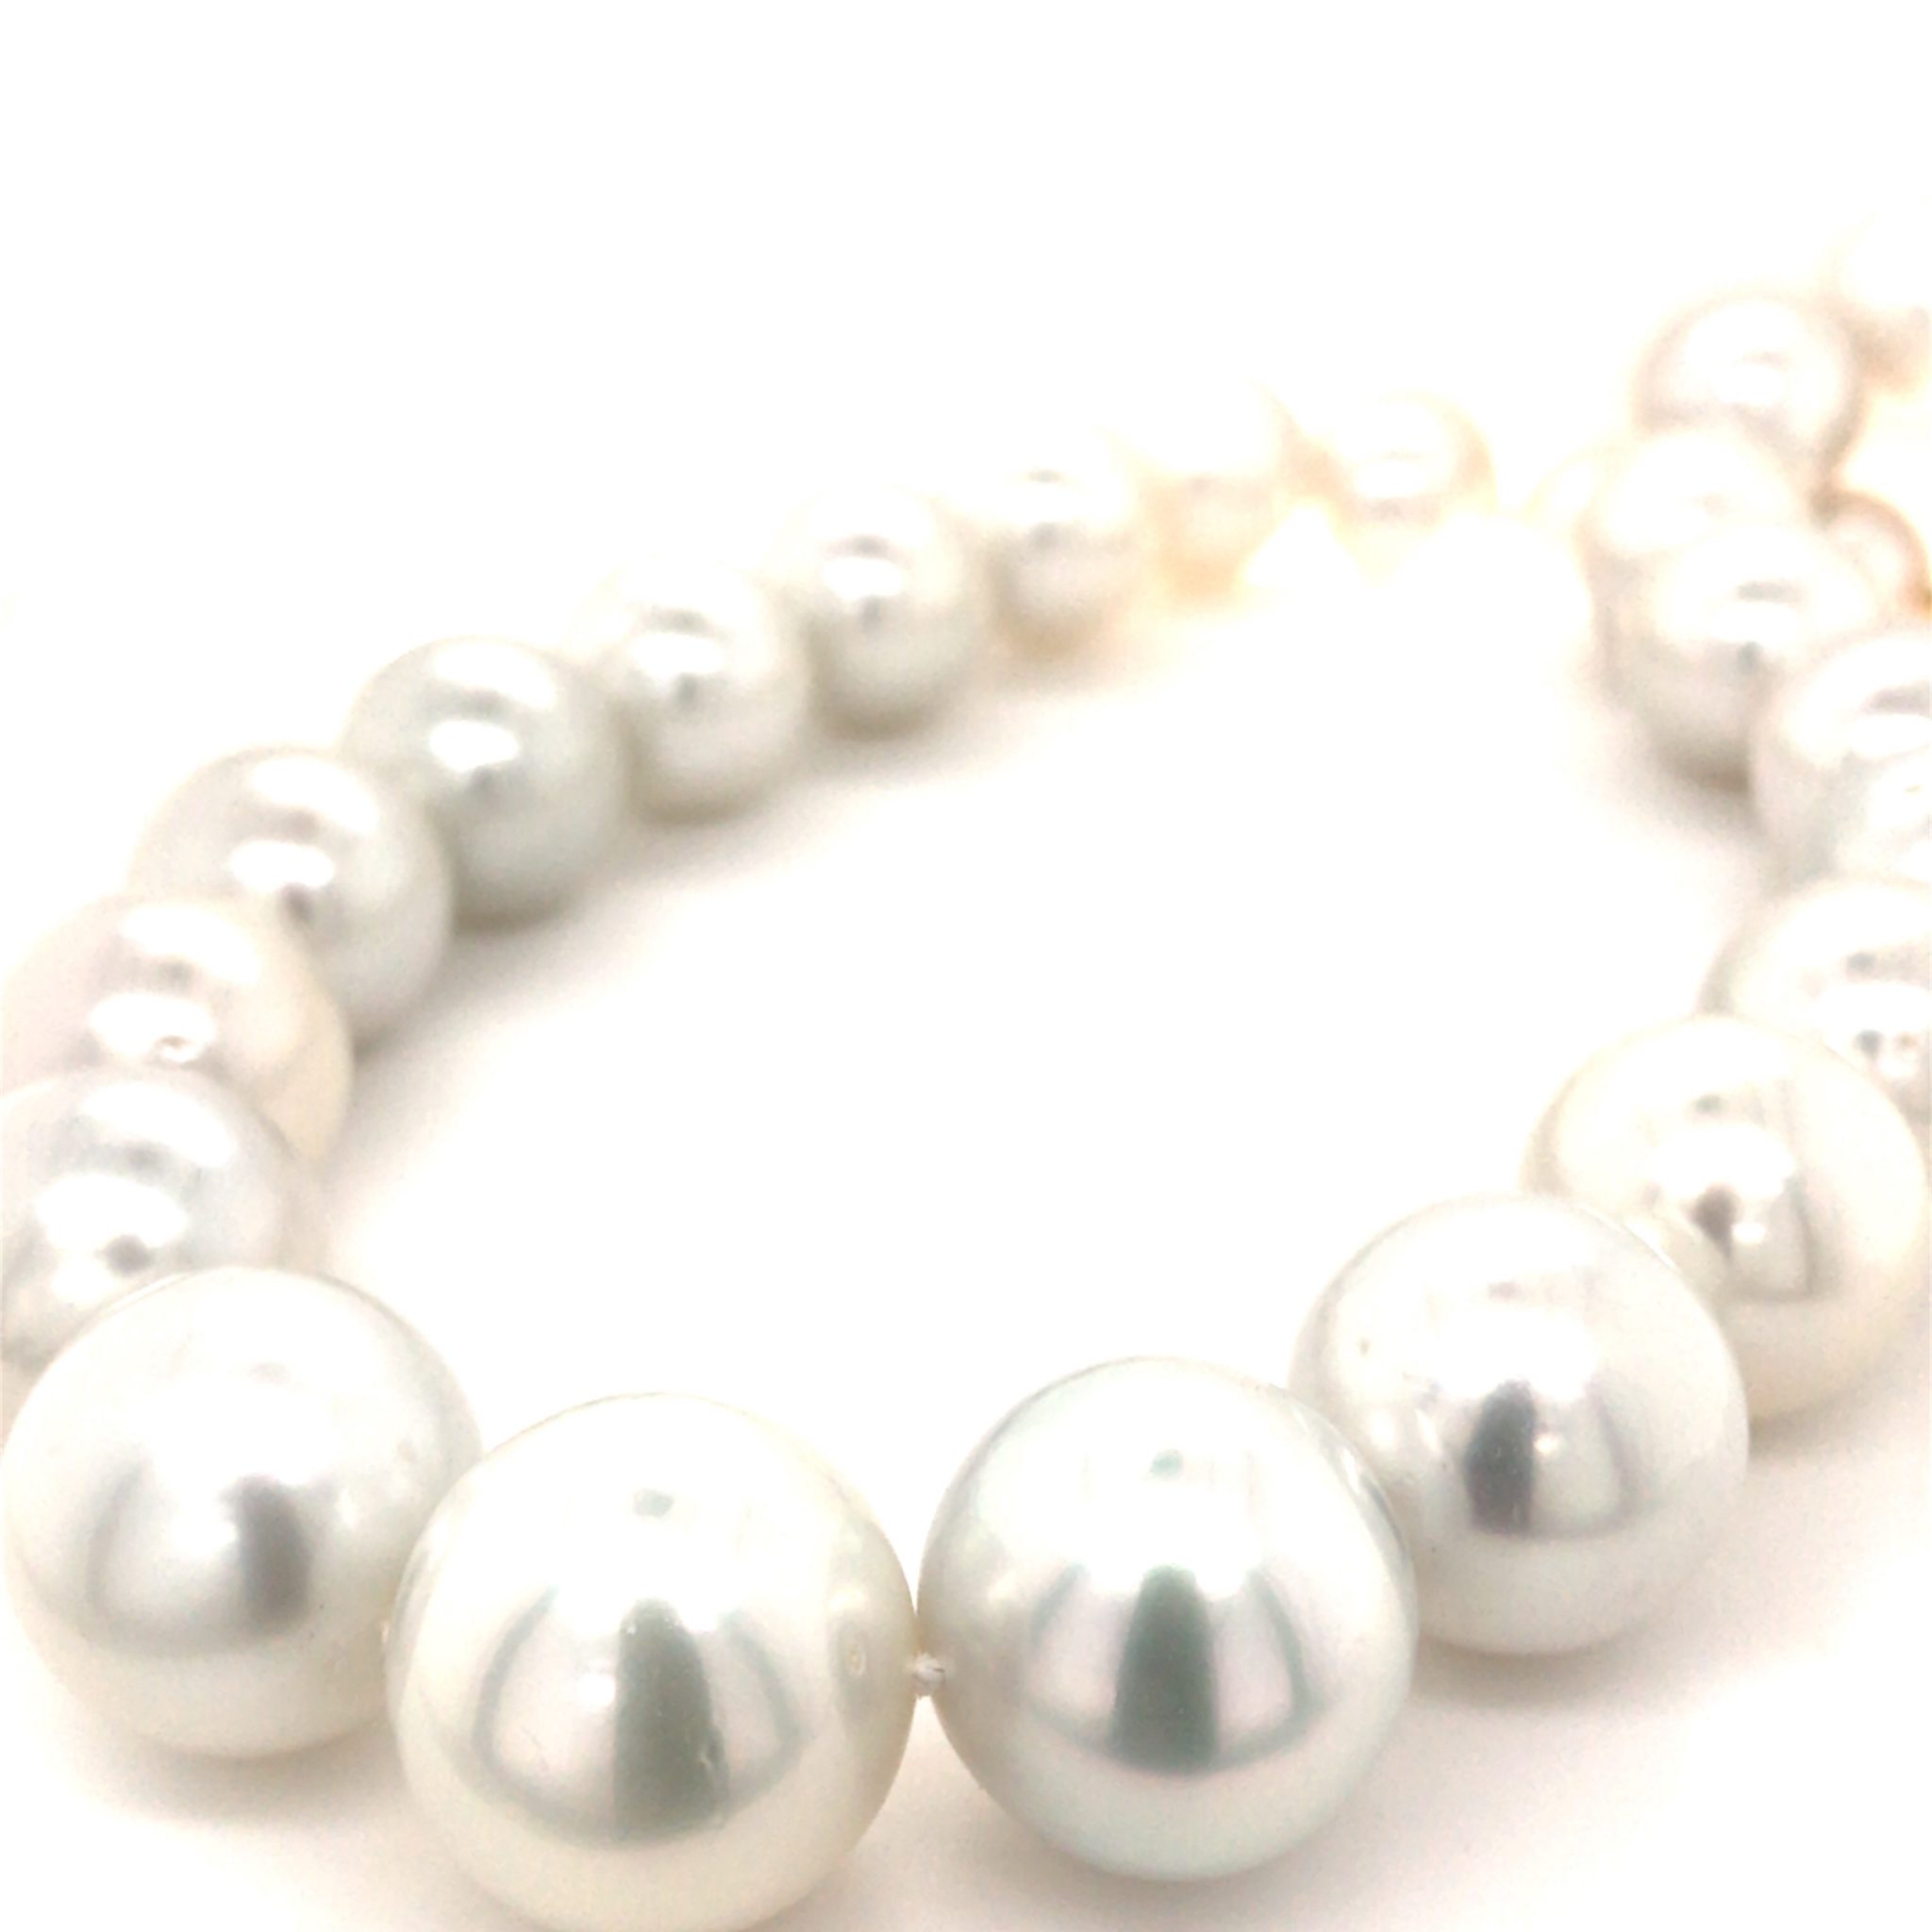 Strand of 25 Graduated 15mm-18mm Near Round White South Sea Pearls ...